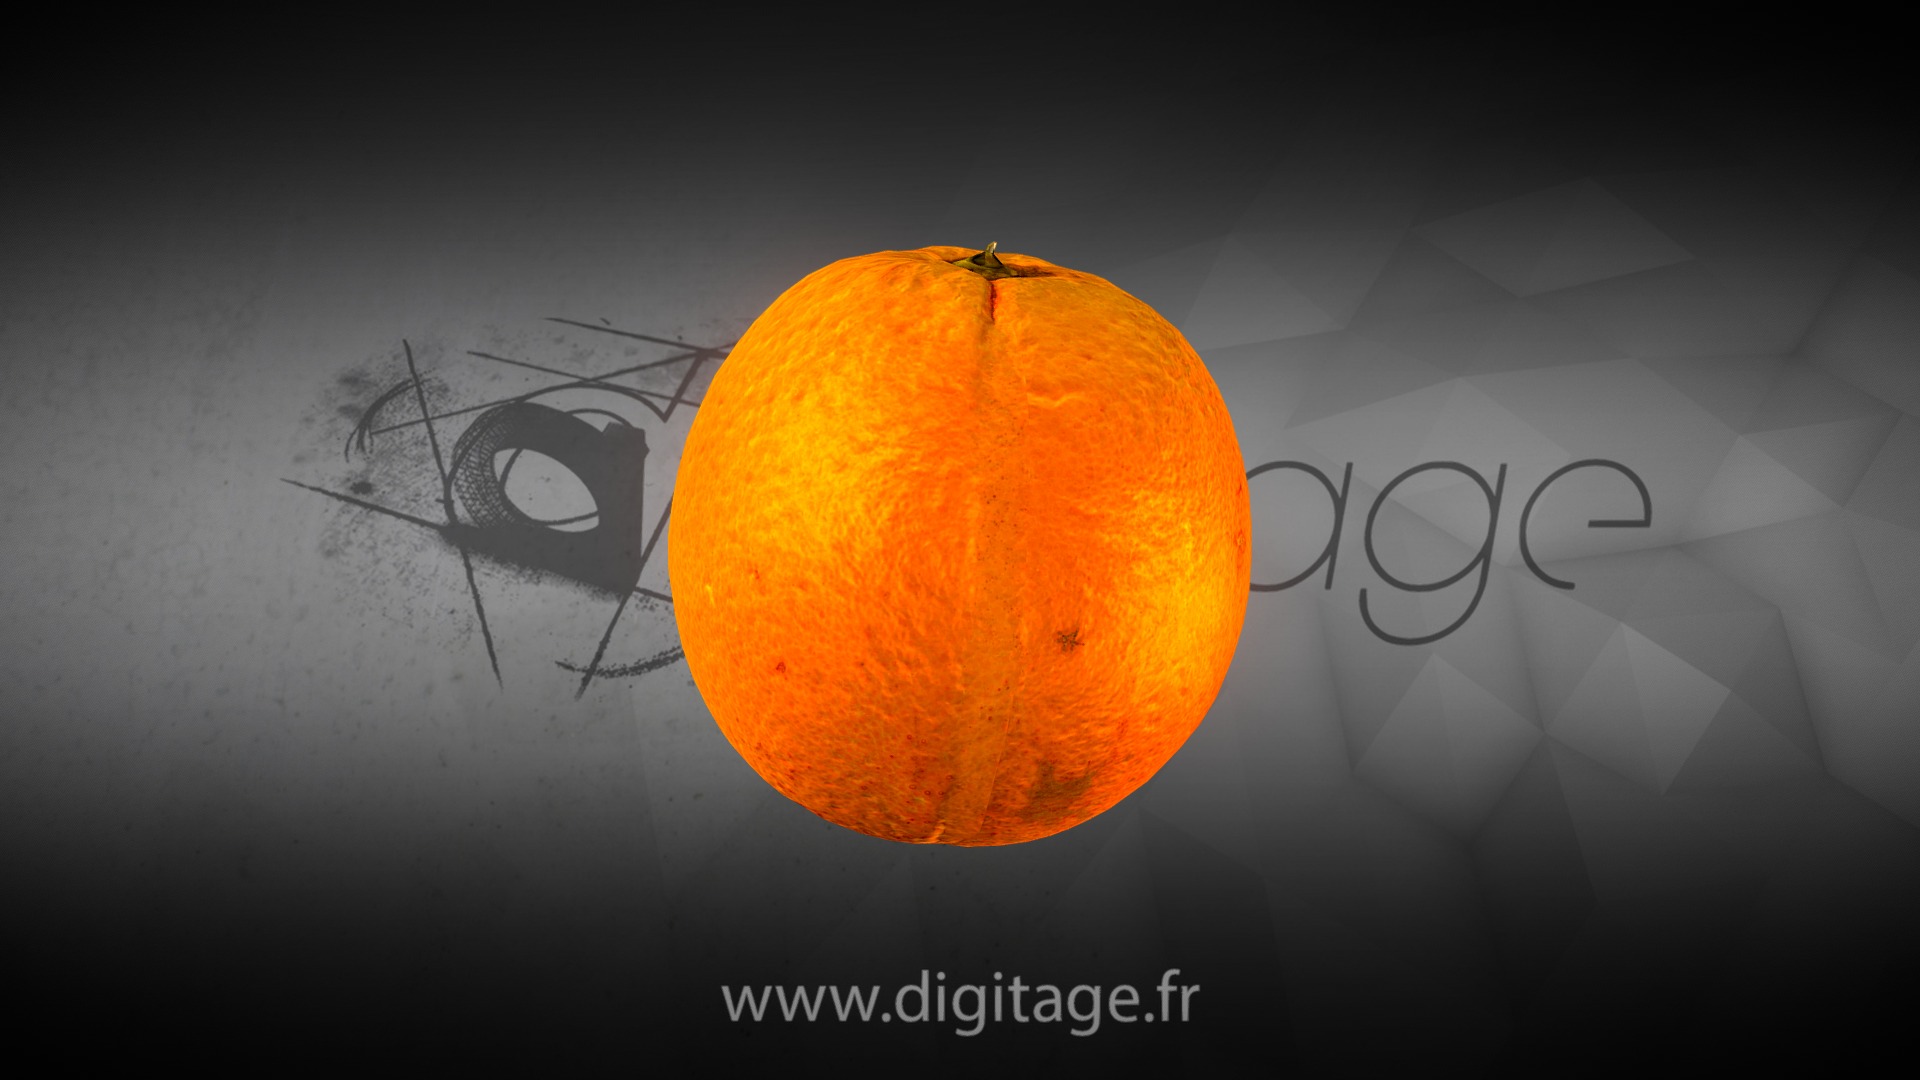 3D model Orange - This is a 3D model of the Orange. The 3D model is about an orange on a paper.